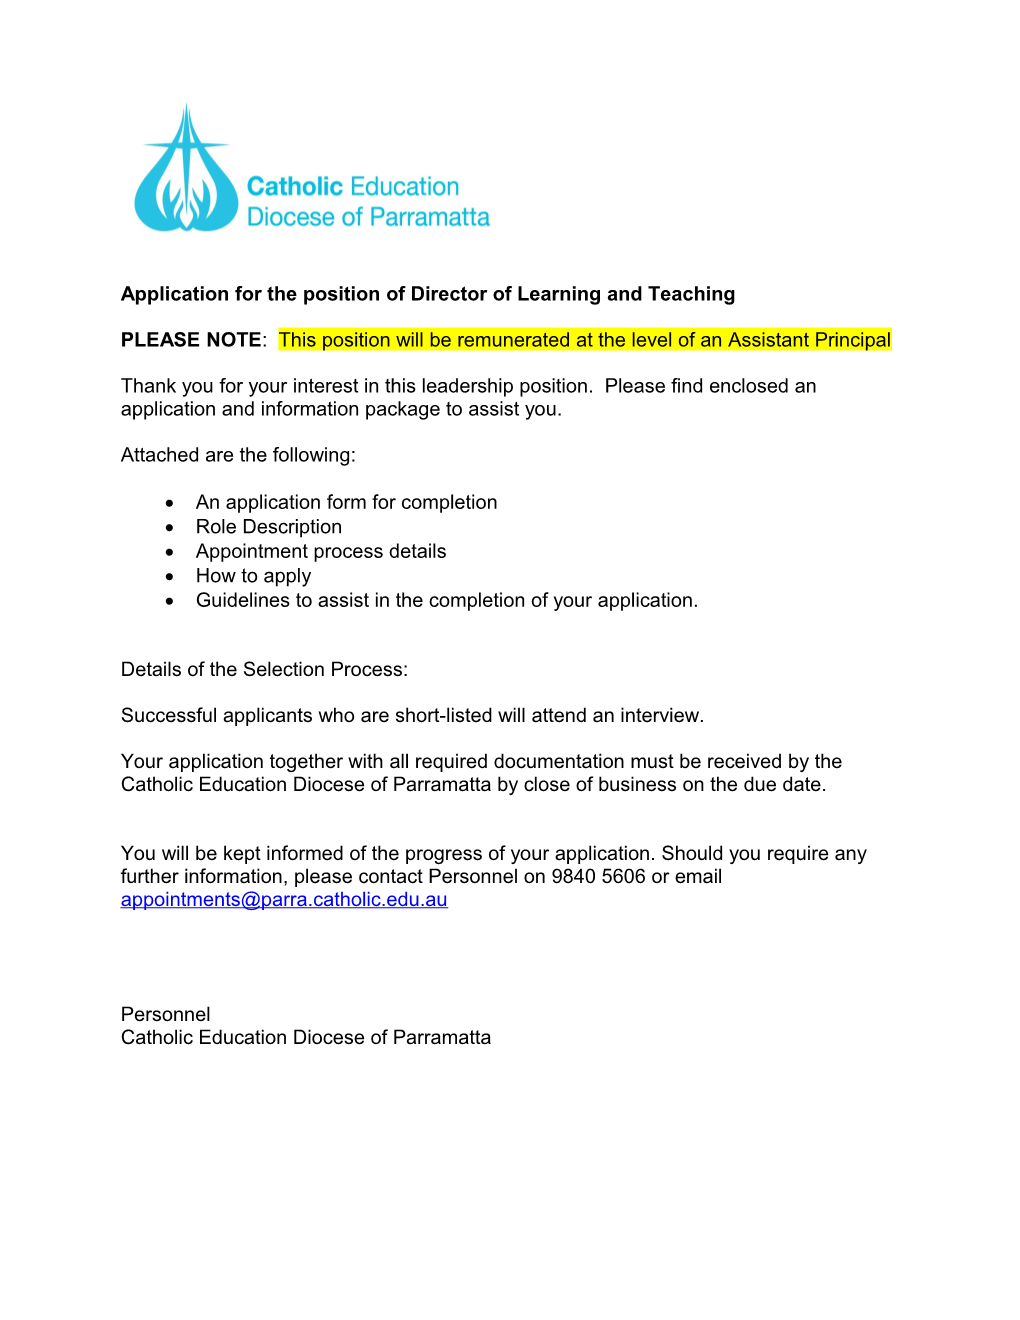 Application for the Position of Director of Learning and Teaching